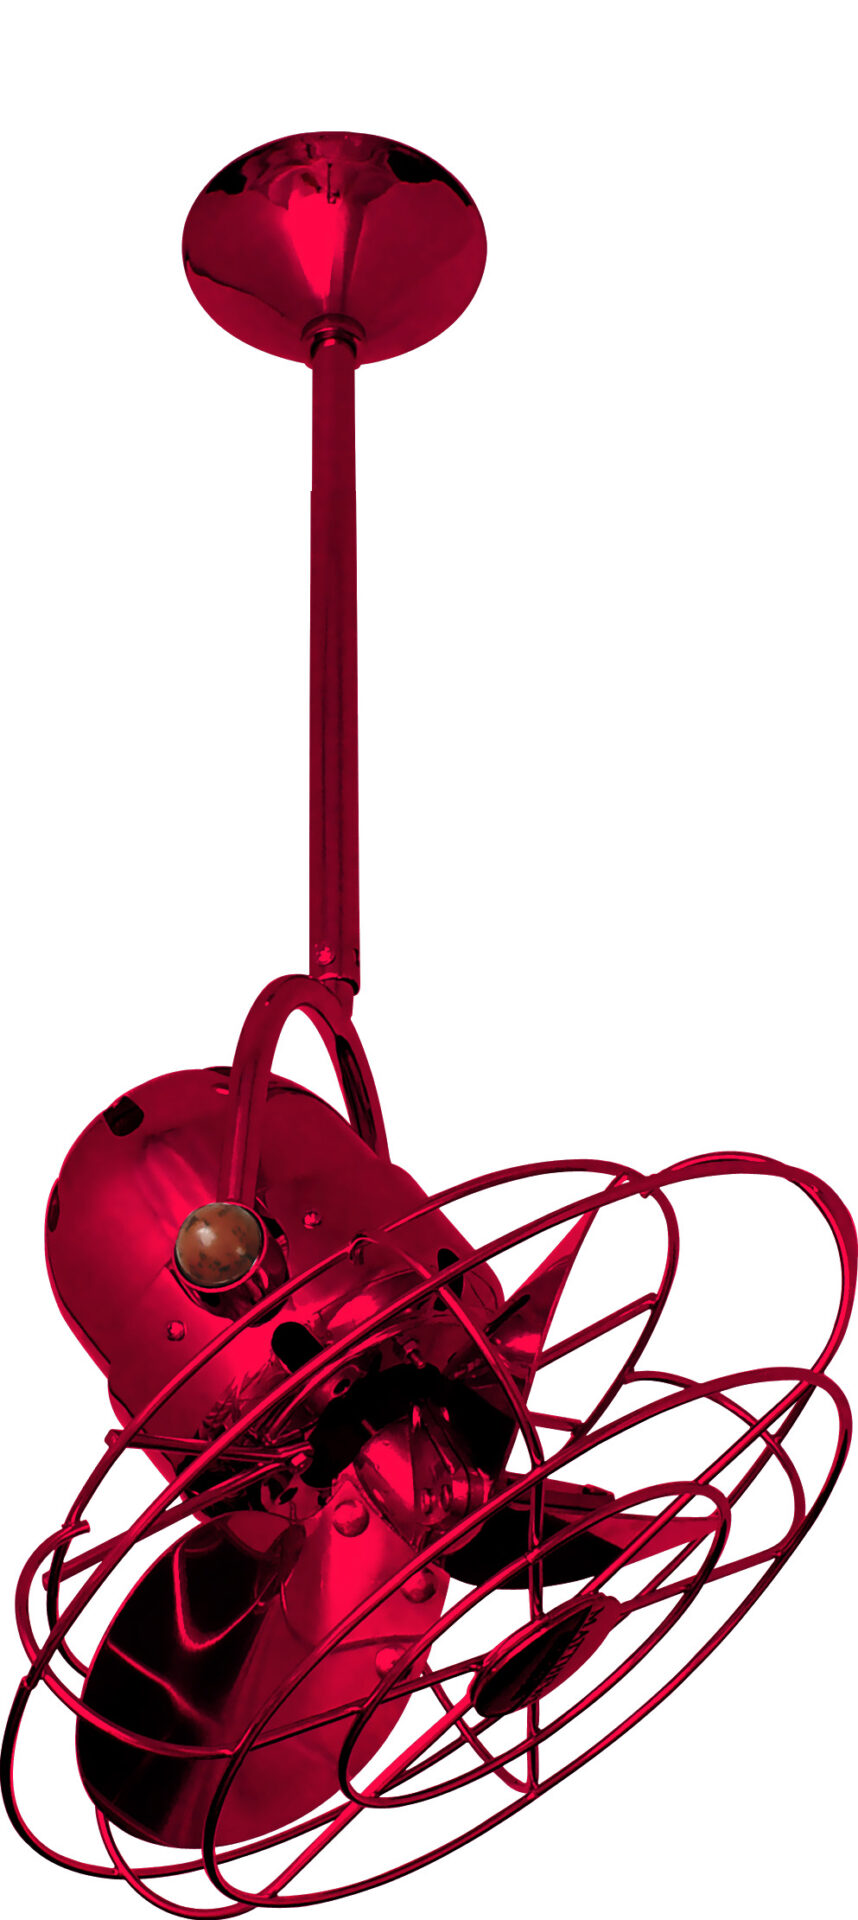 Bianca Direcional Ceiling Fan in Rubi / Red with Metal Blades and Decorative Cage